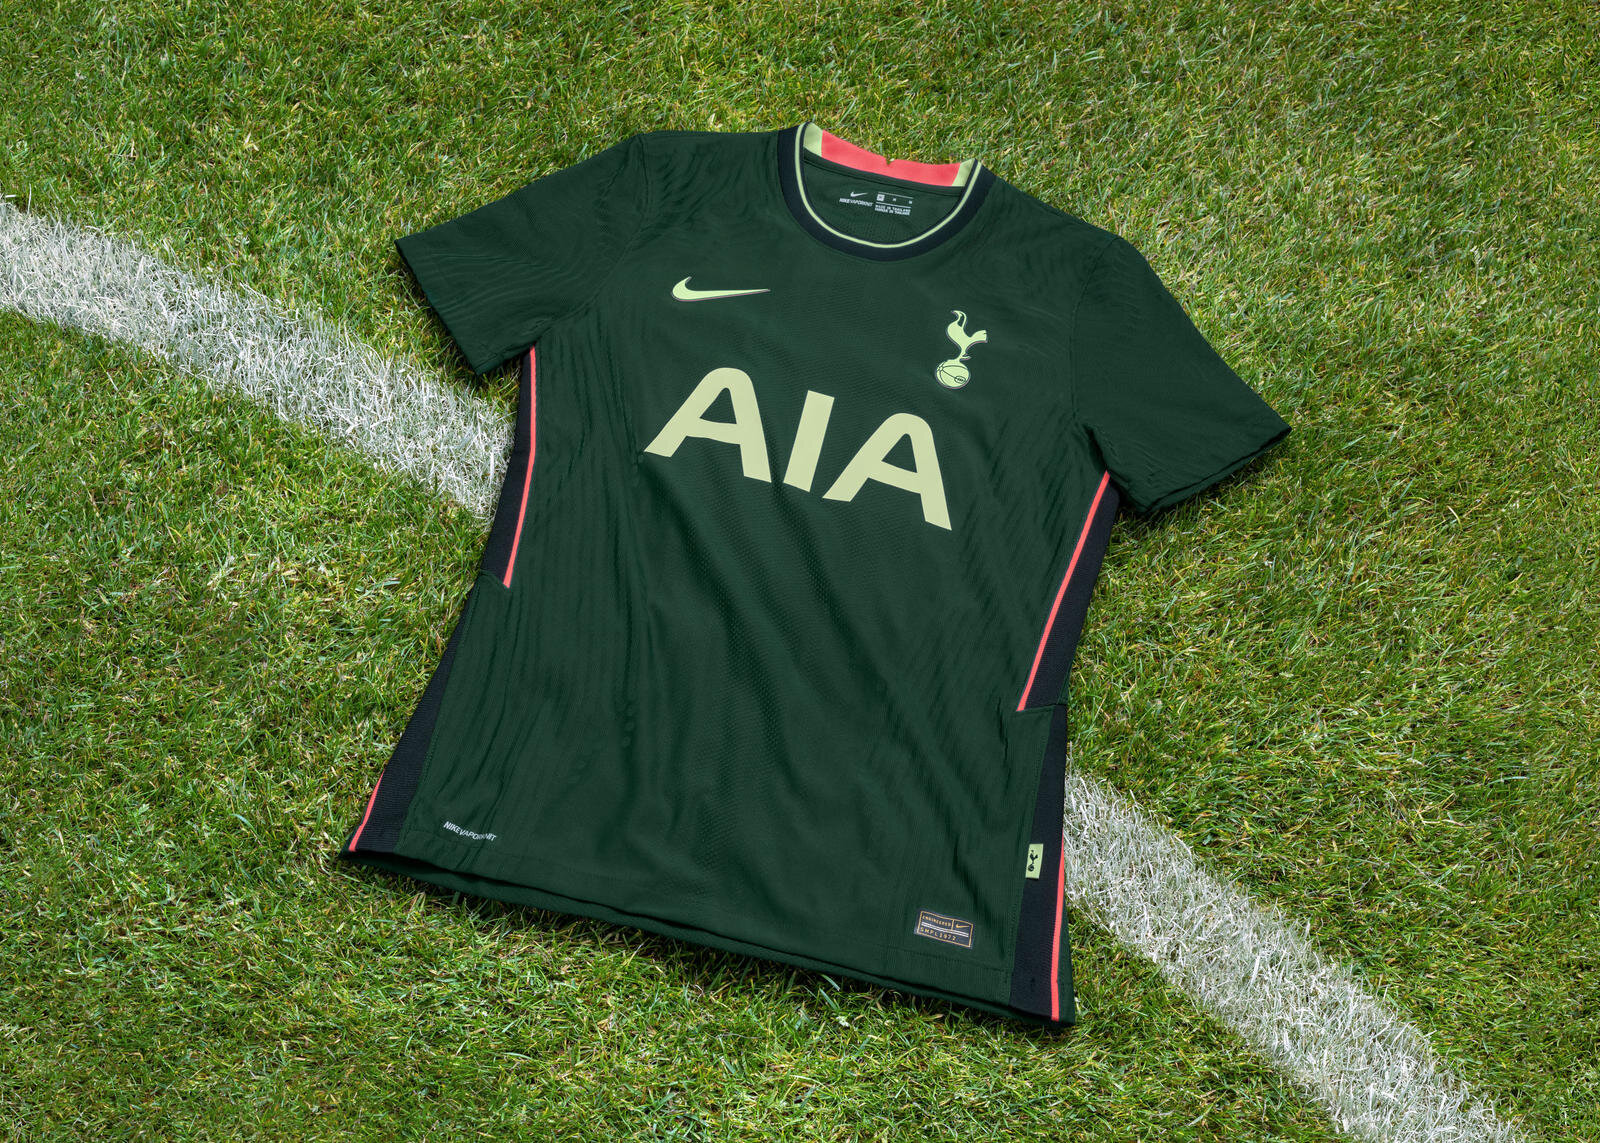 📸 Tottenham unveil new 'space-themed' away kit for upcoming